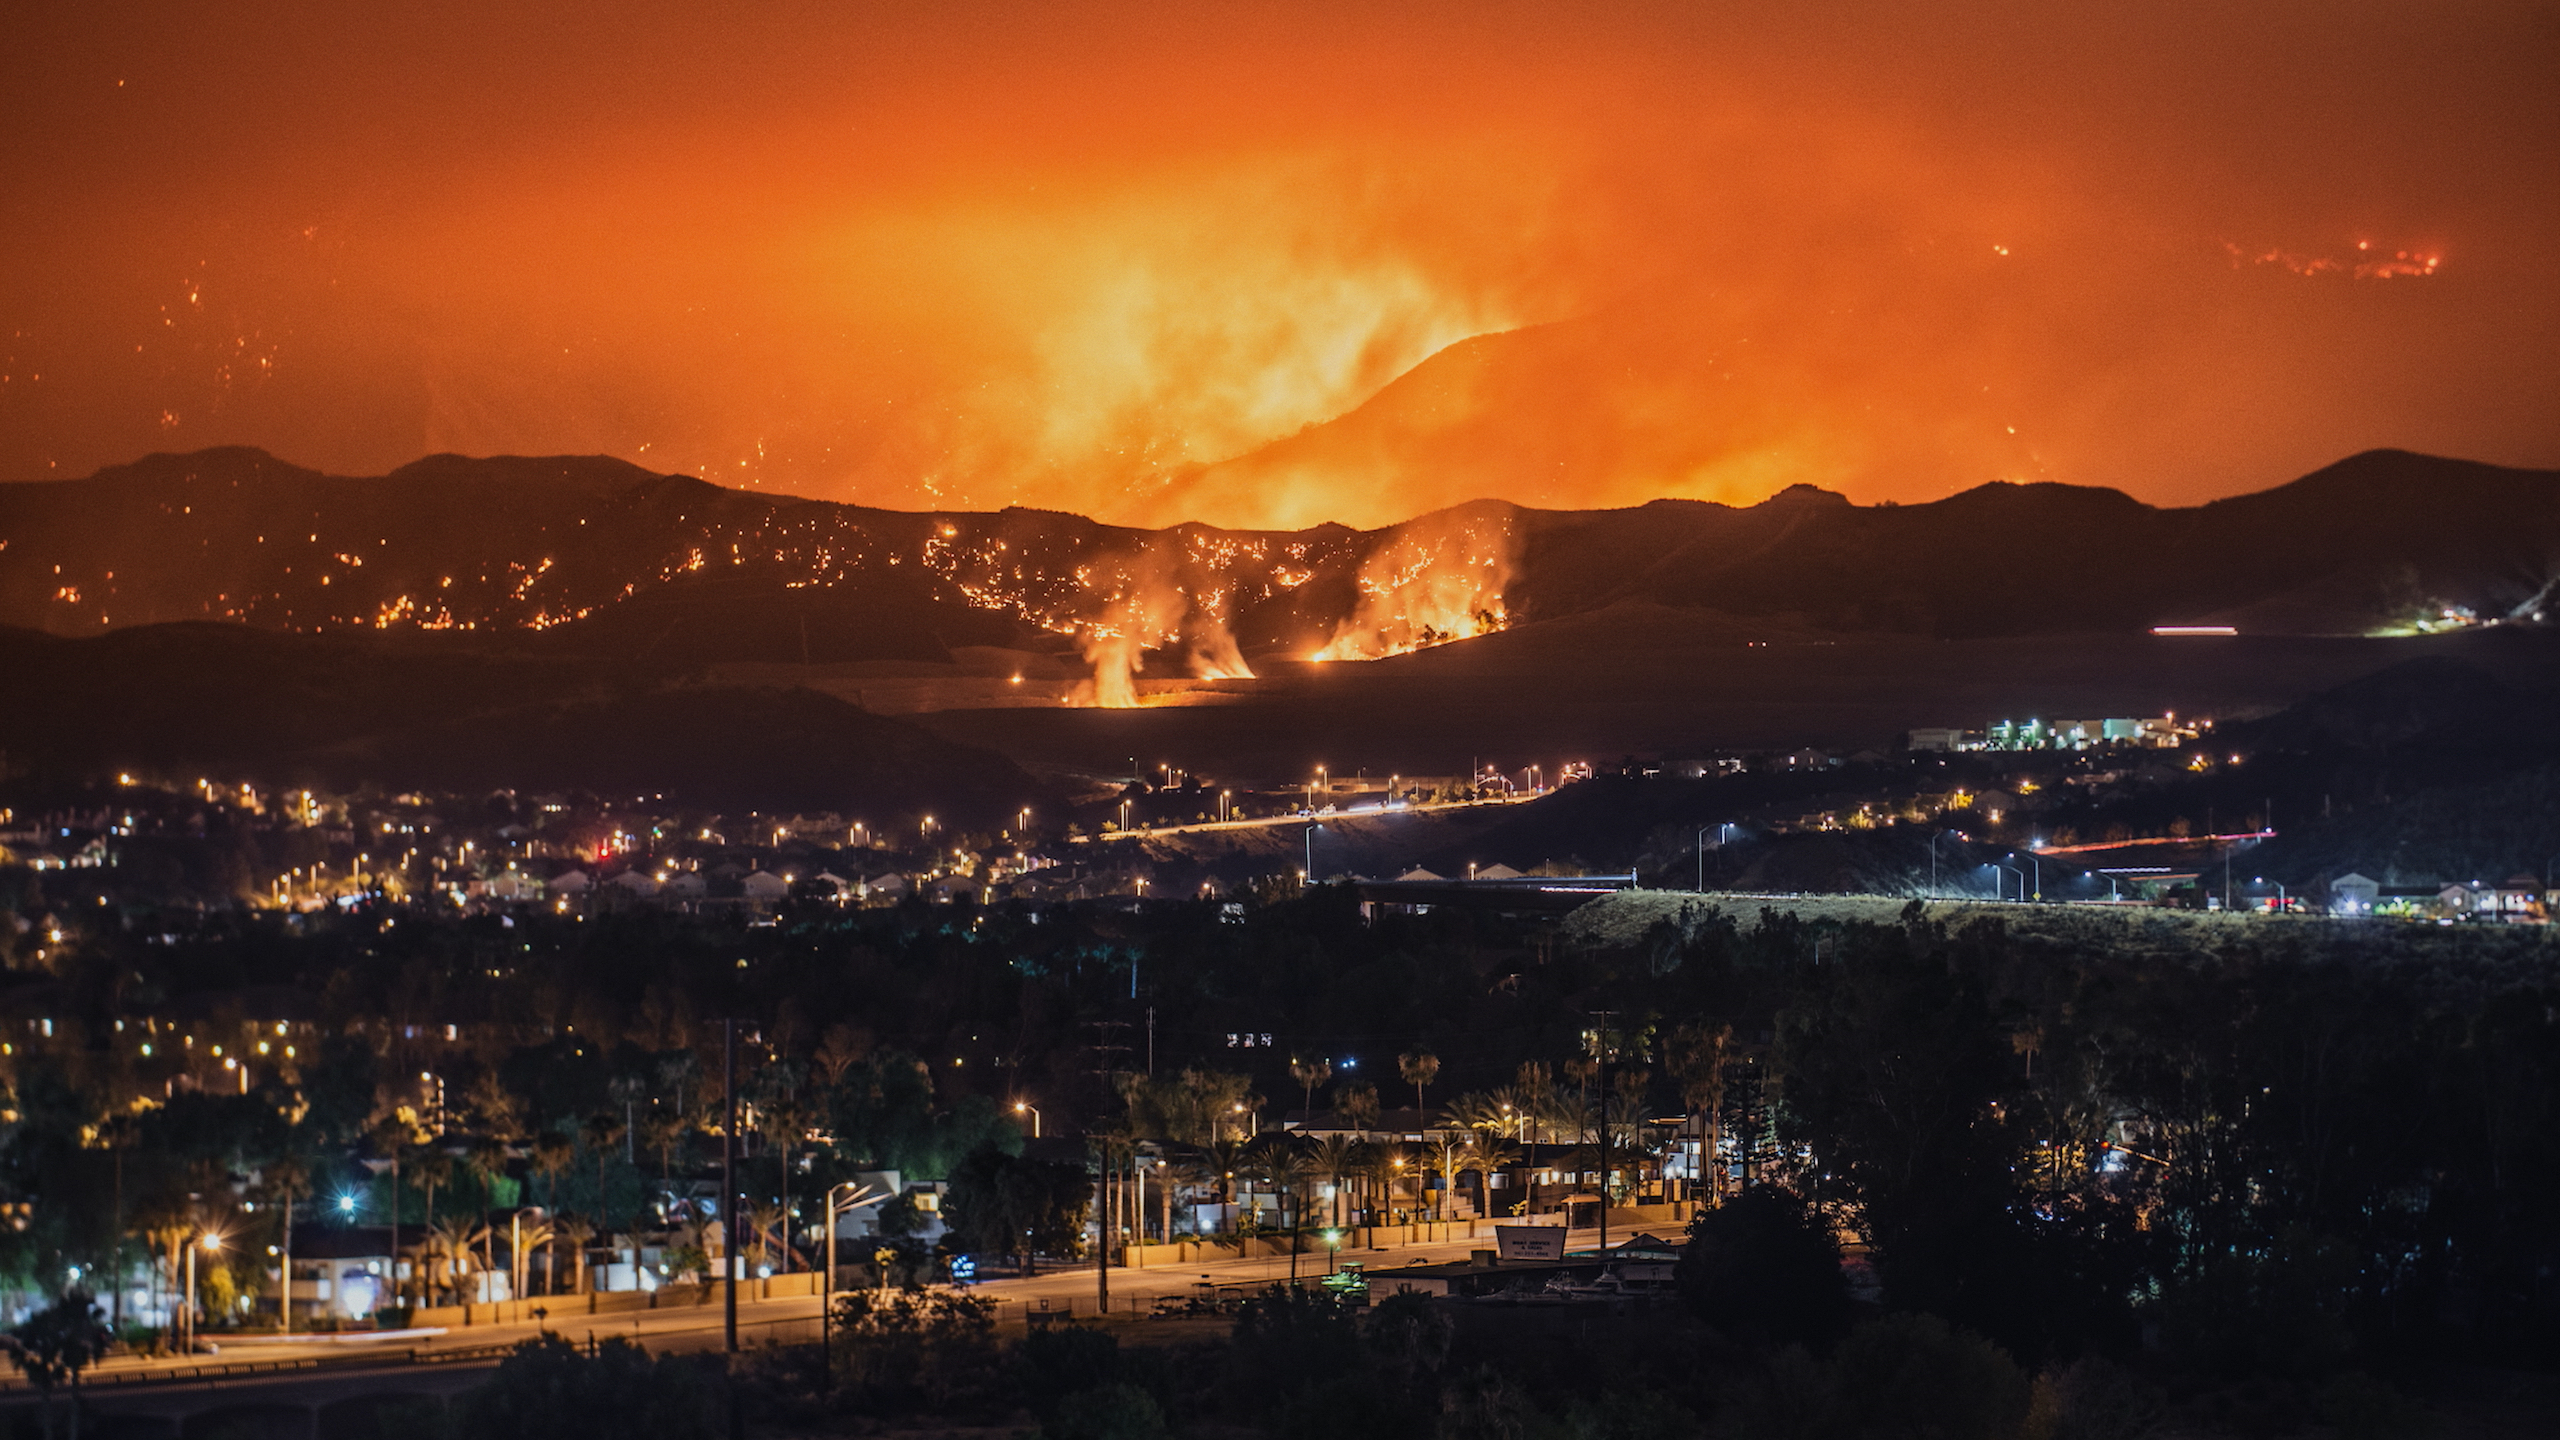 A raging wildfire in California, a film still from Lucy Walker's documentary “Bring Your Own Brigade.”